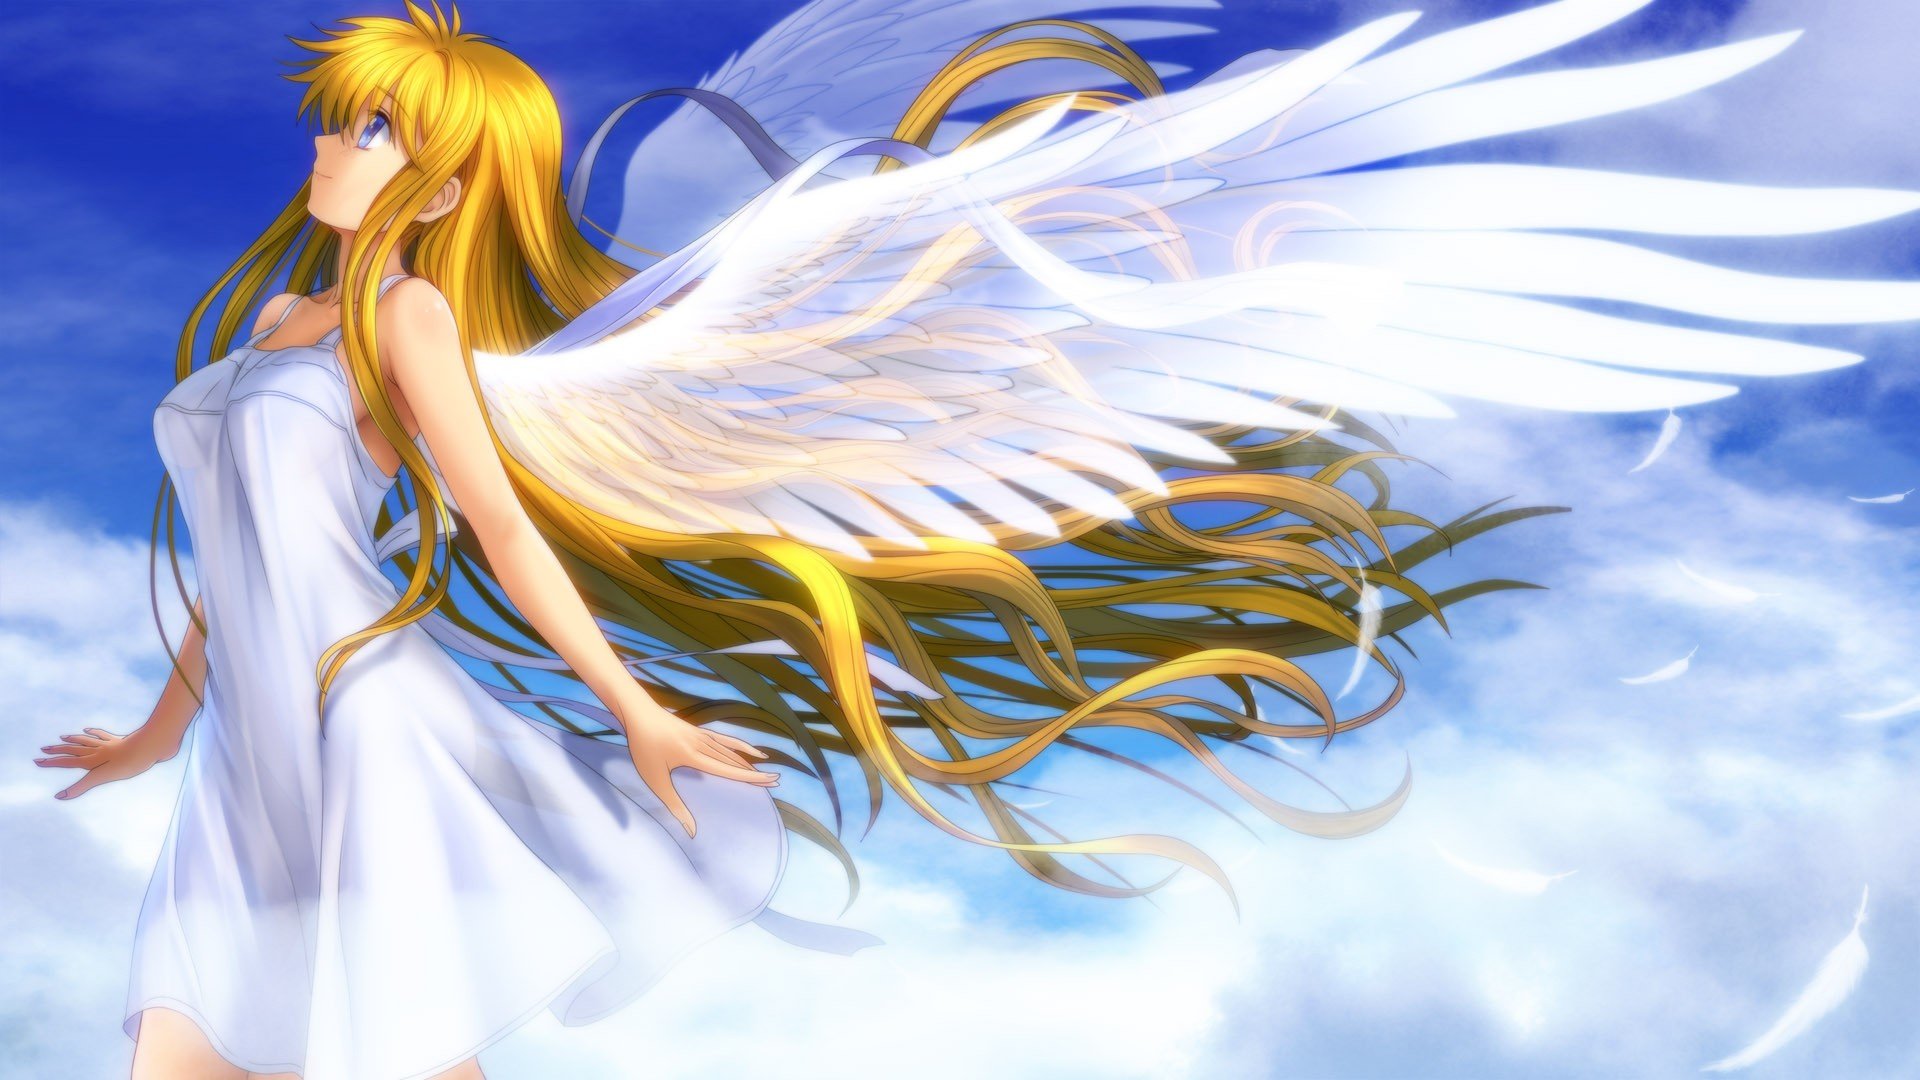 blondes, Video, Games, Clouds, Wings, Dress, Blue, Eyes, Wind, Long, Hair, Feathers, Visual, Novels, Kamio, Misuzu, Angel, Wings, White, Dress, Soft, Shading, Skyscapes, Anime, Girls, Air,  anime Wallpaper